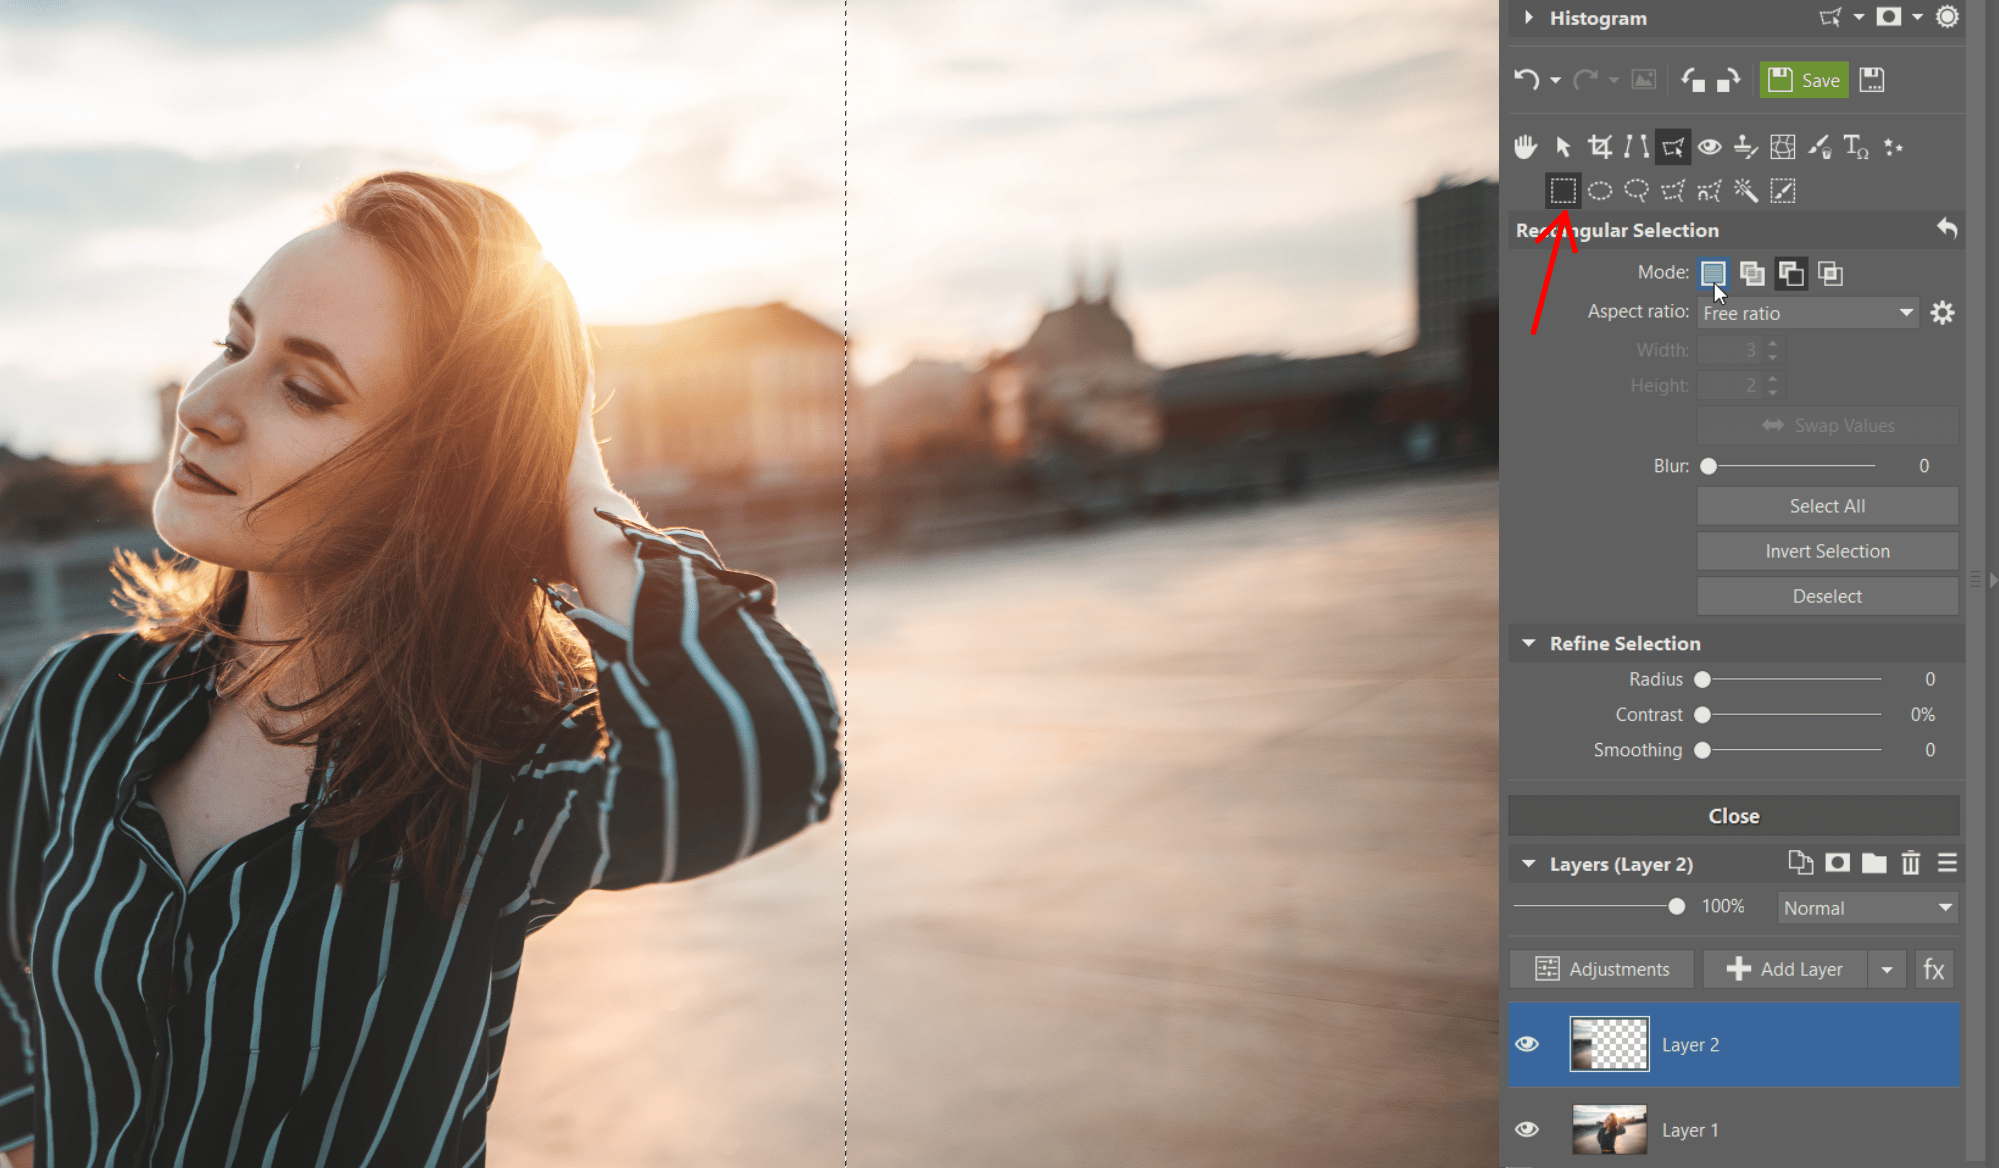 Stretch Your Photos to a Wide-angle Format. You Can Do It in the Editor With No Cropping or Losses.